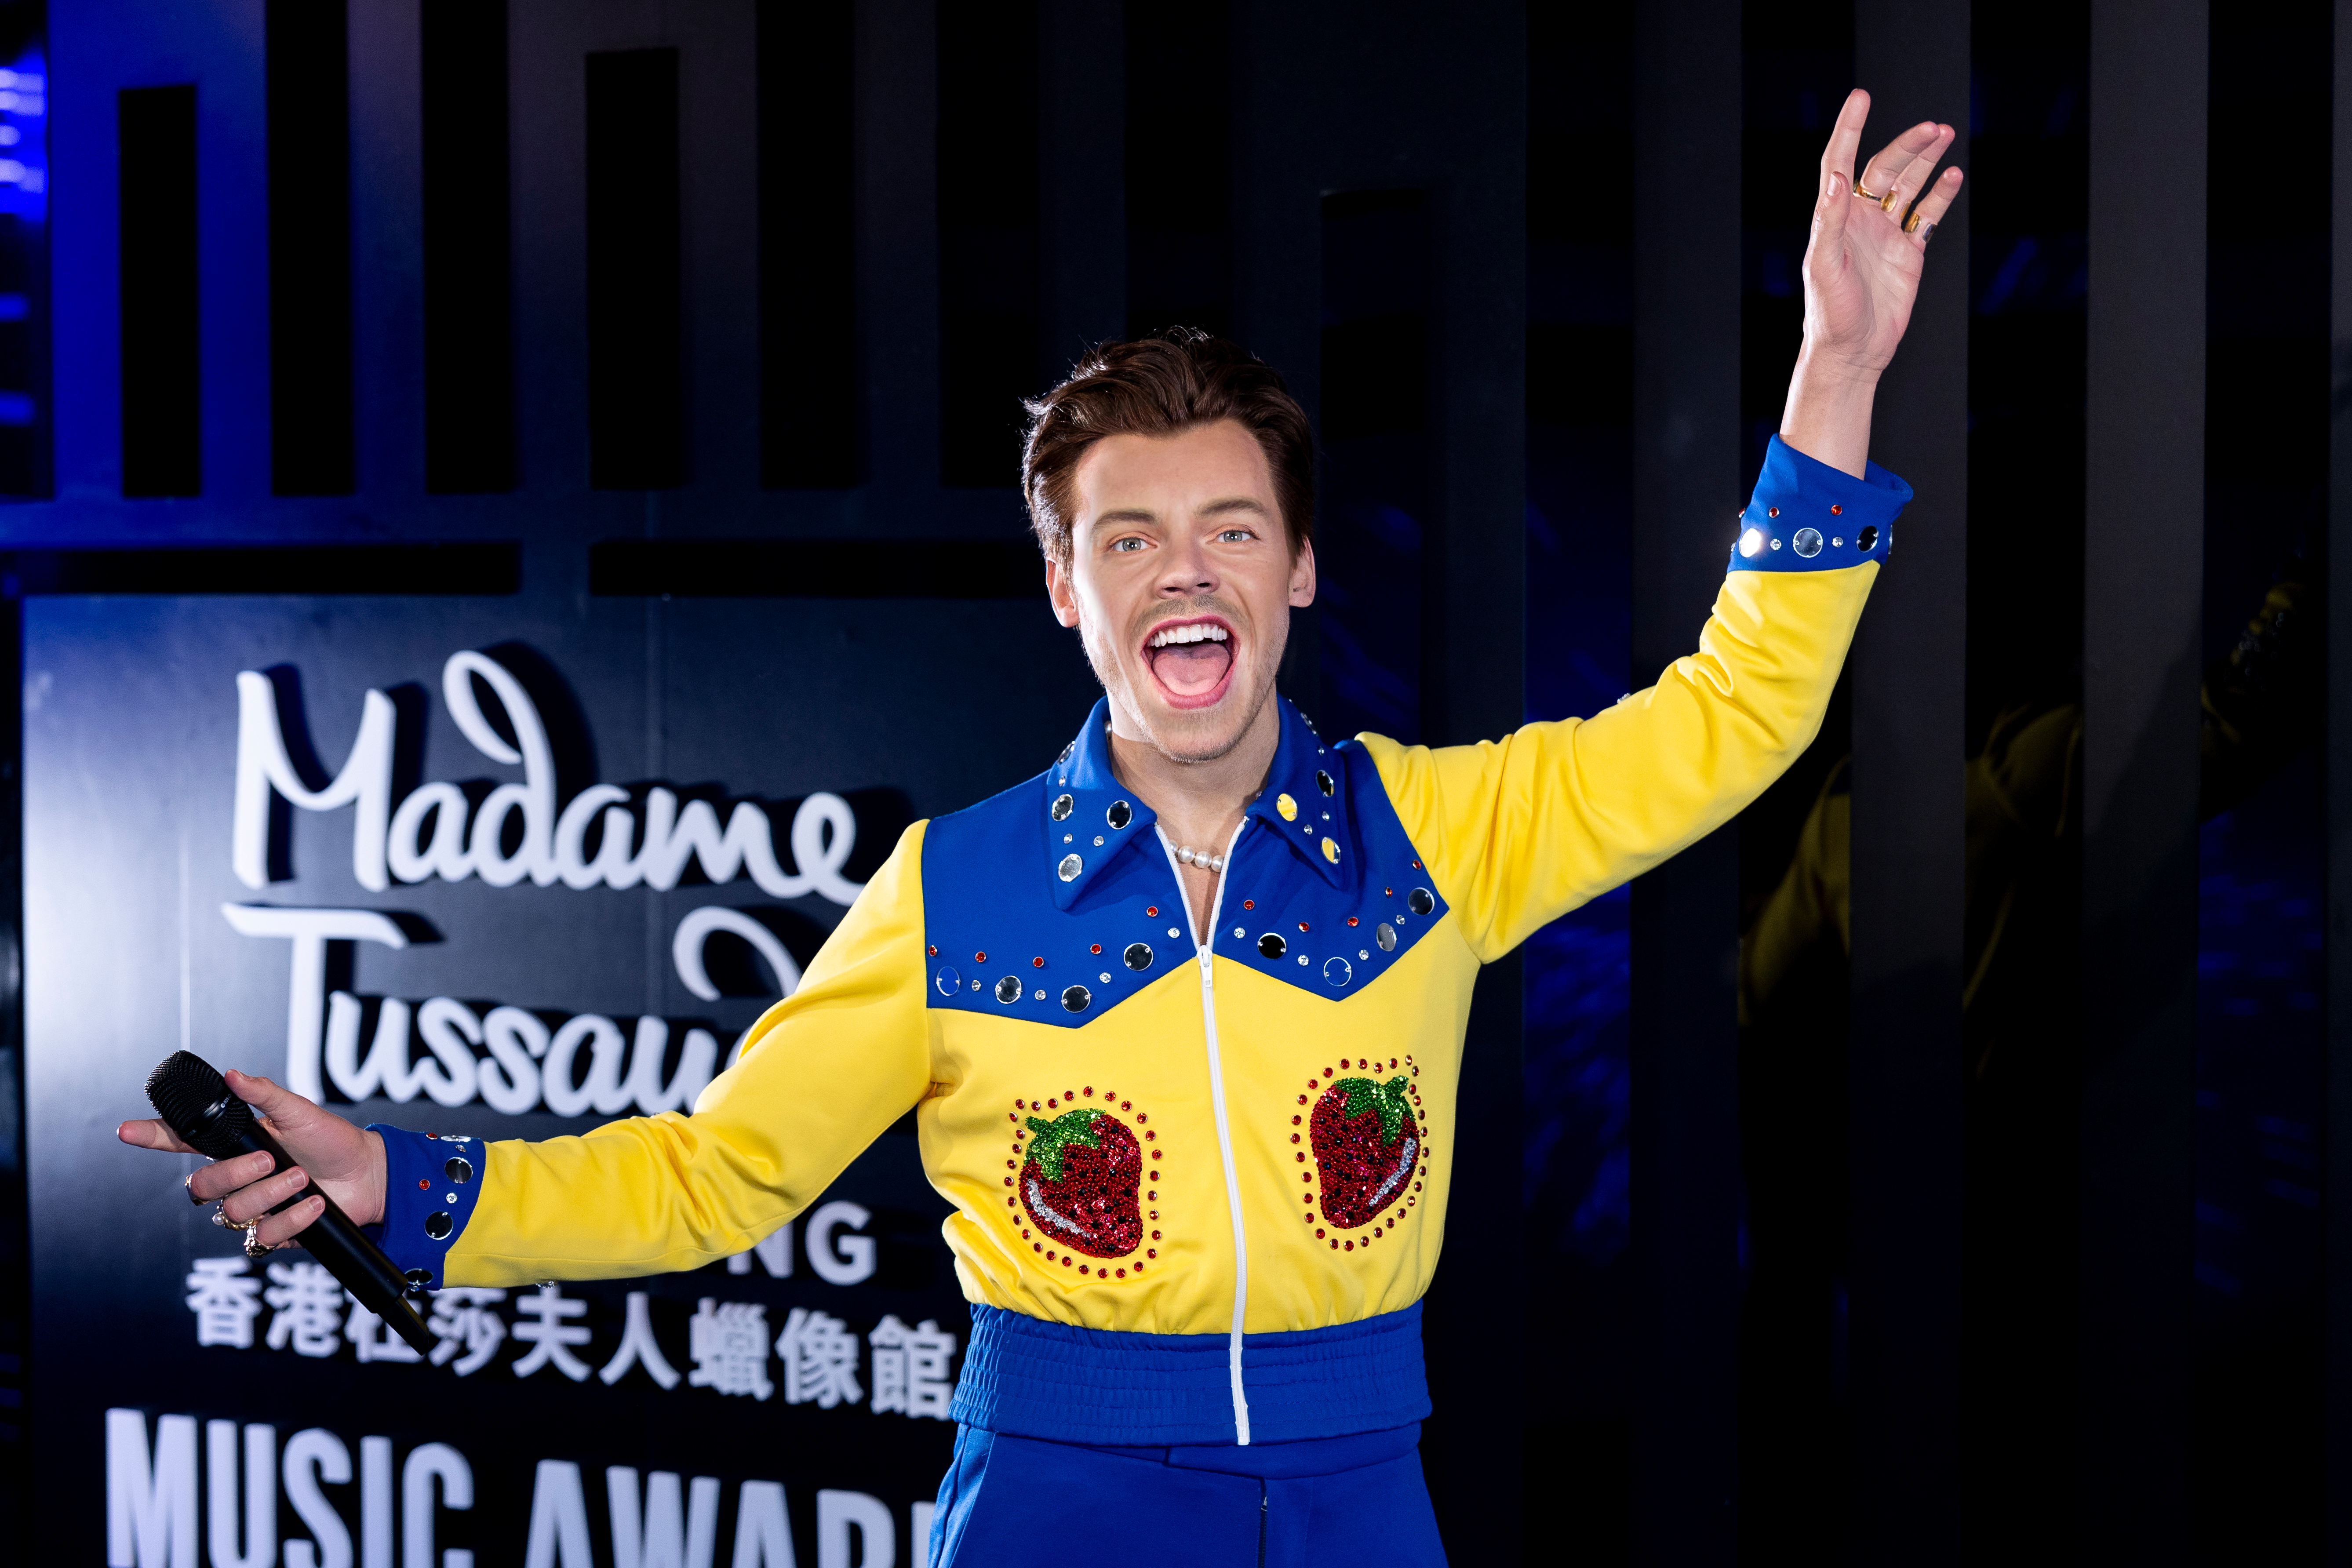 Harry Styles wax figure limited display at Madame Tussauds Hong Kong.